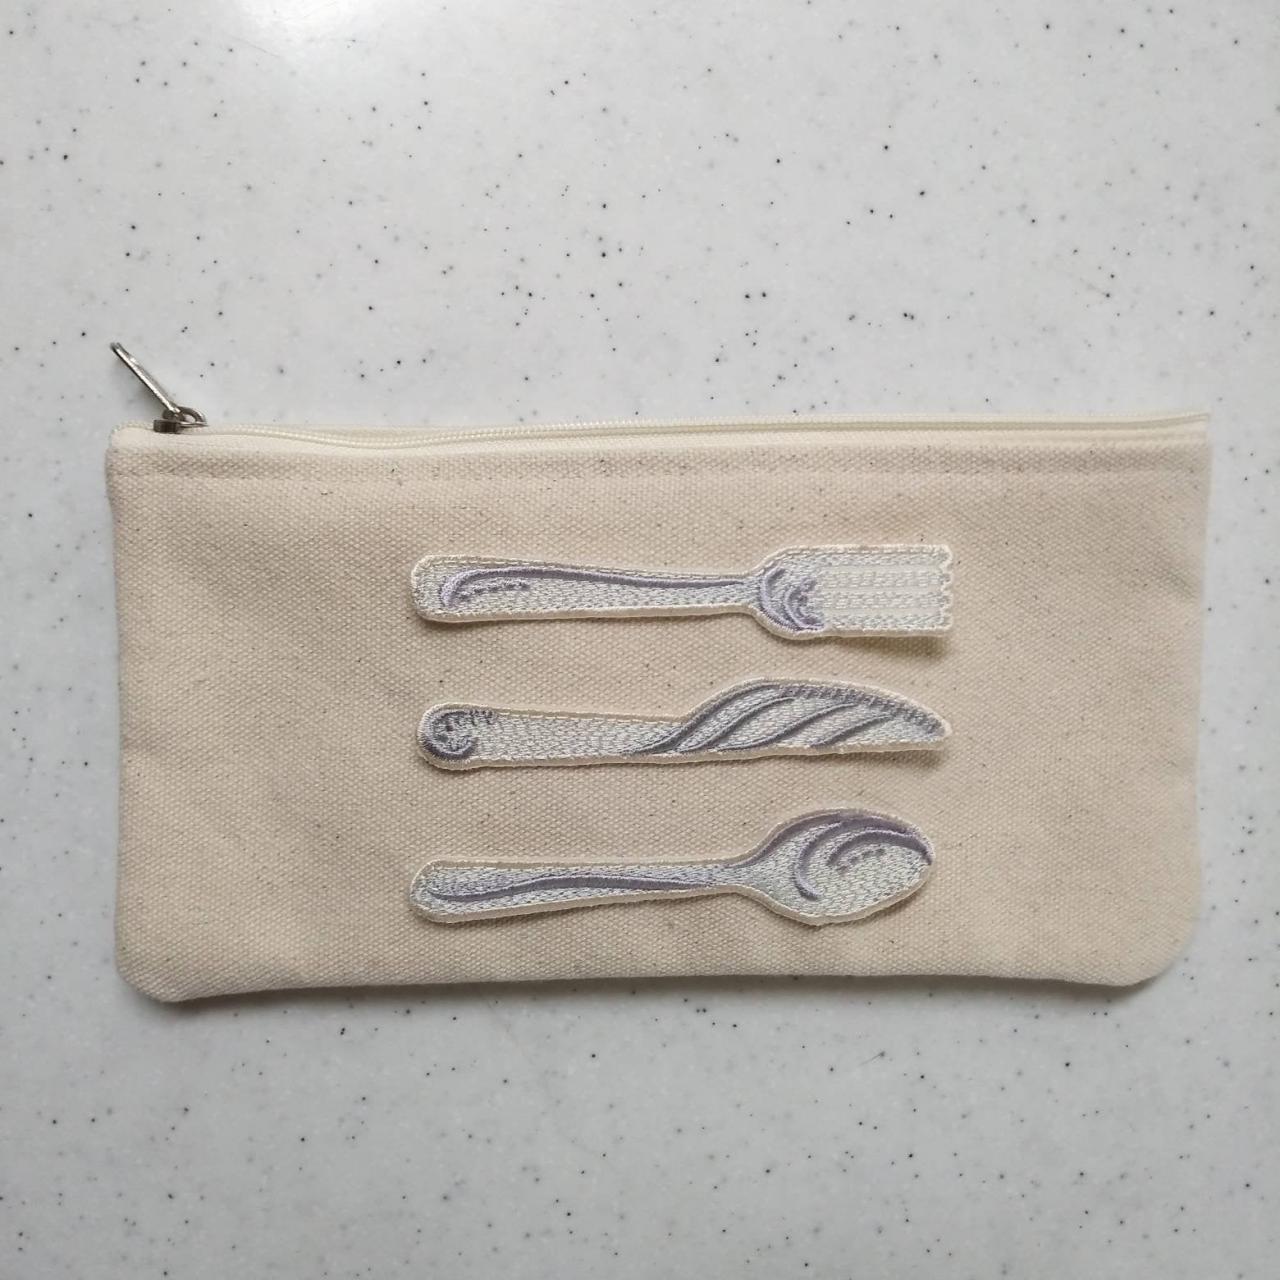 Fork Knife Spoon Cutlery Zipper Pouch, Canvas Pouch, Make-up Pouch, Pencils Pouch